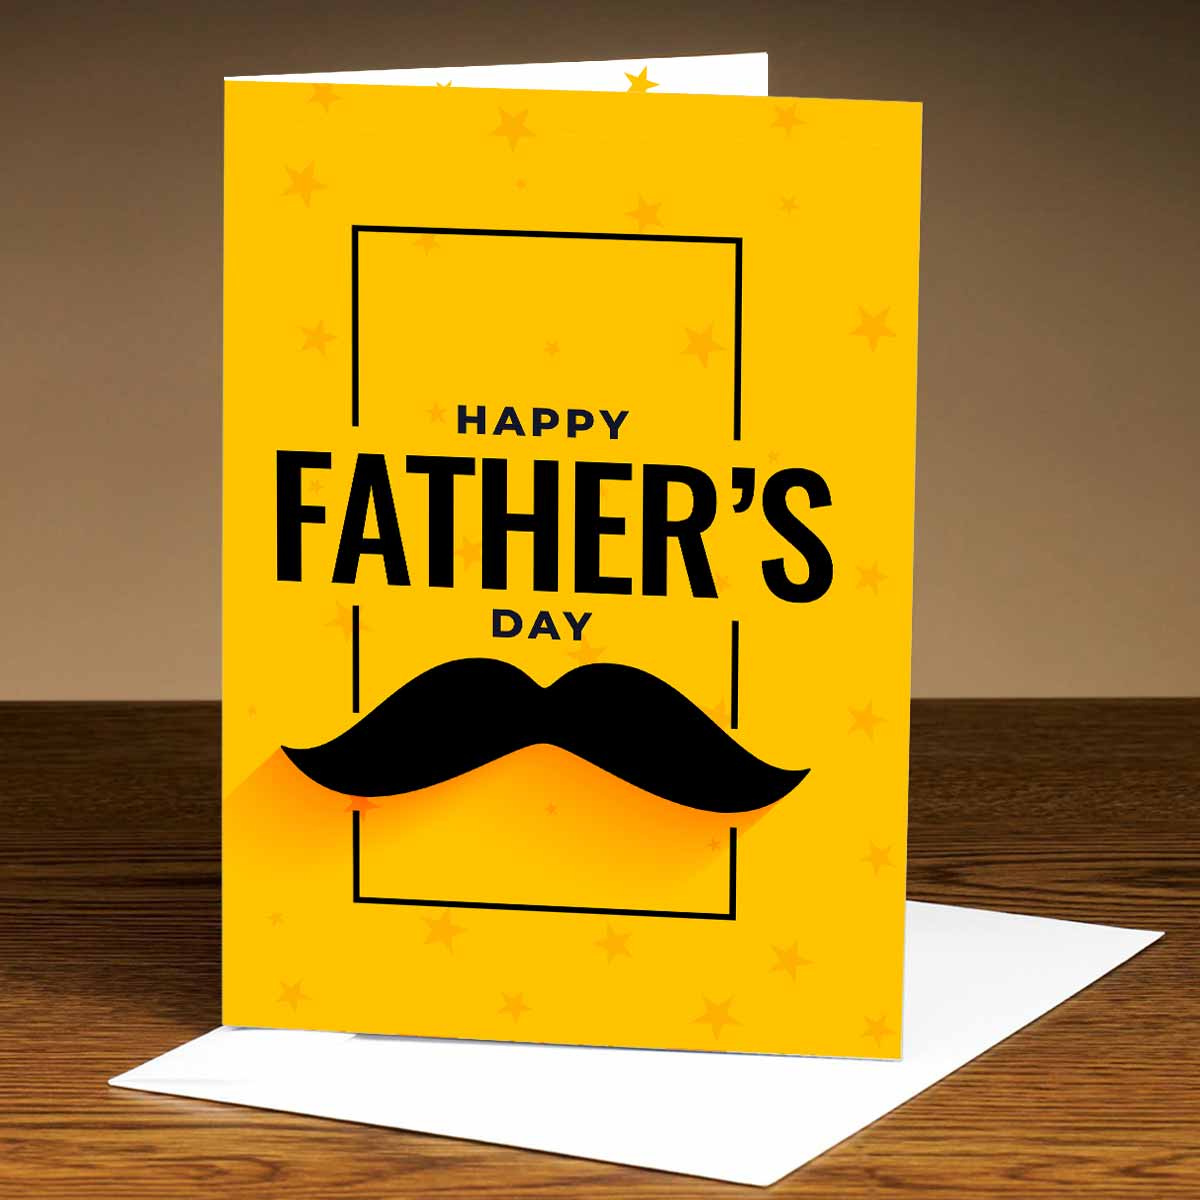 Father's Day Gifts Online | Unique Gift Ideas for Dad | Giftcart.com